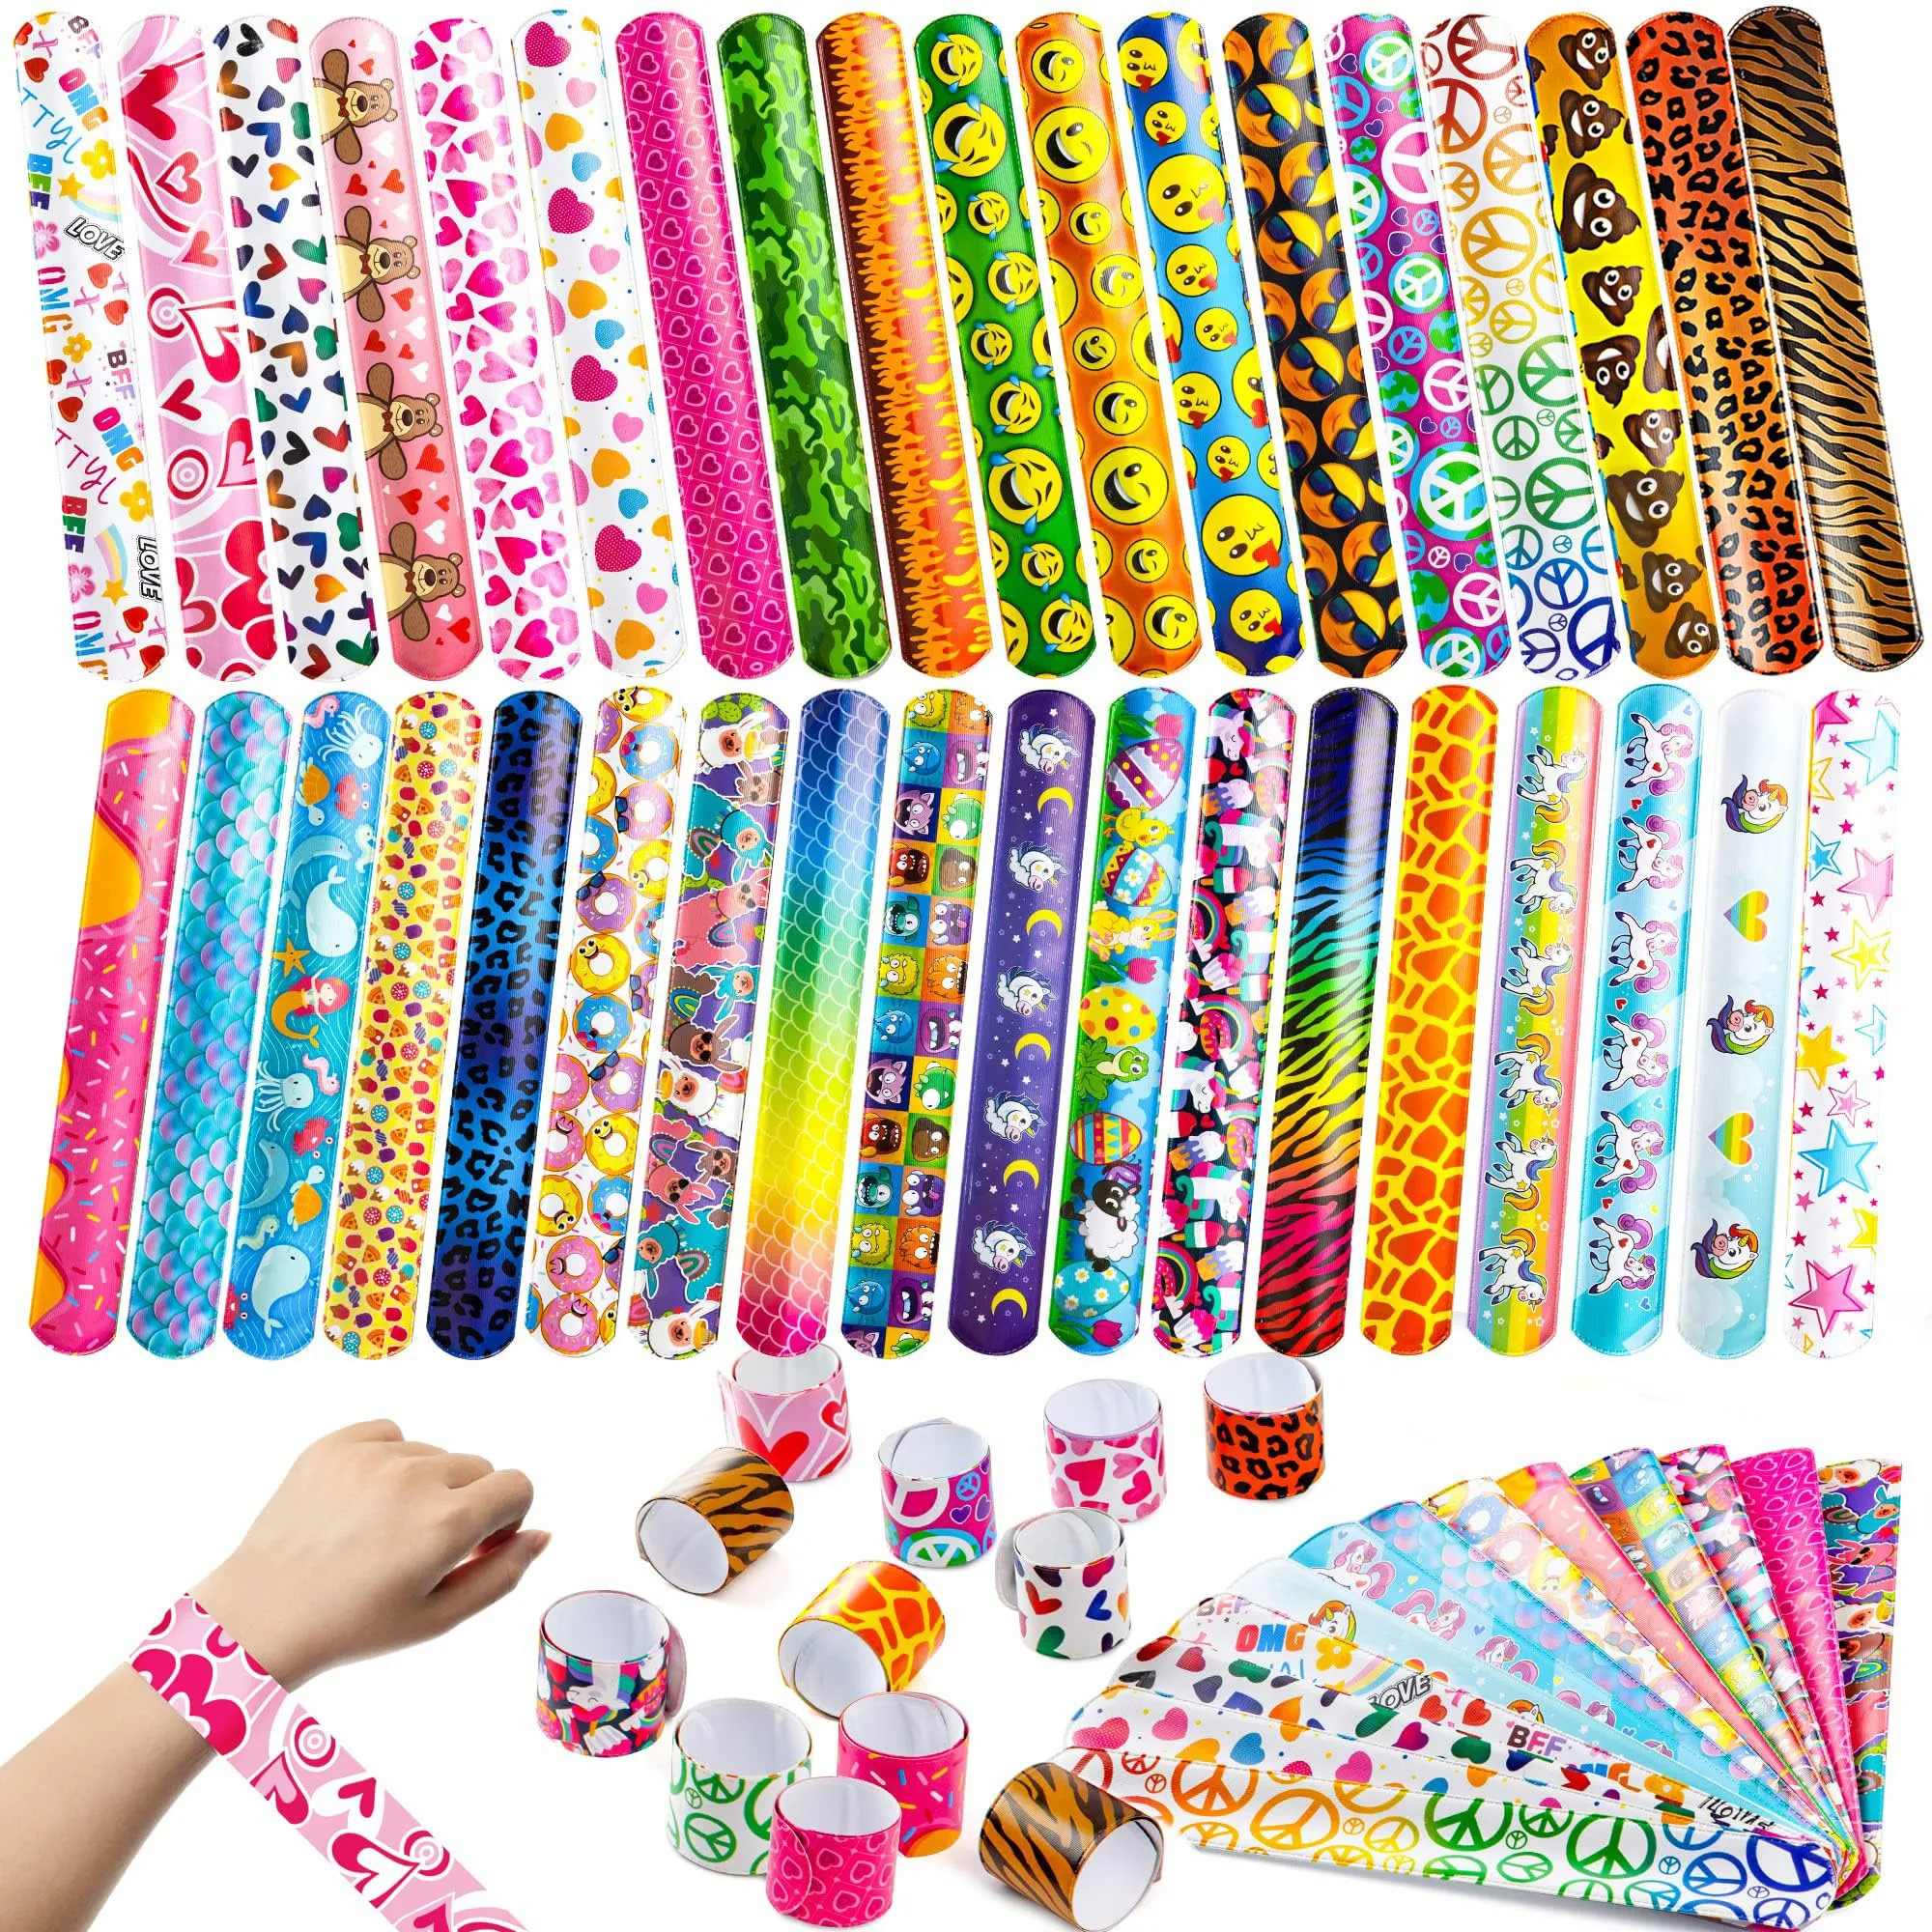 Marvelous Slap Bands for Kids - Fun and Colorful Bracelets for Parties